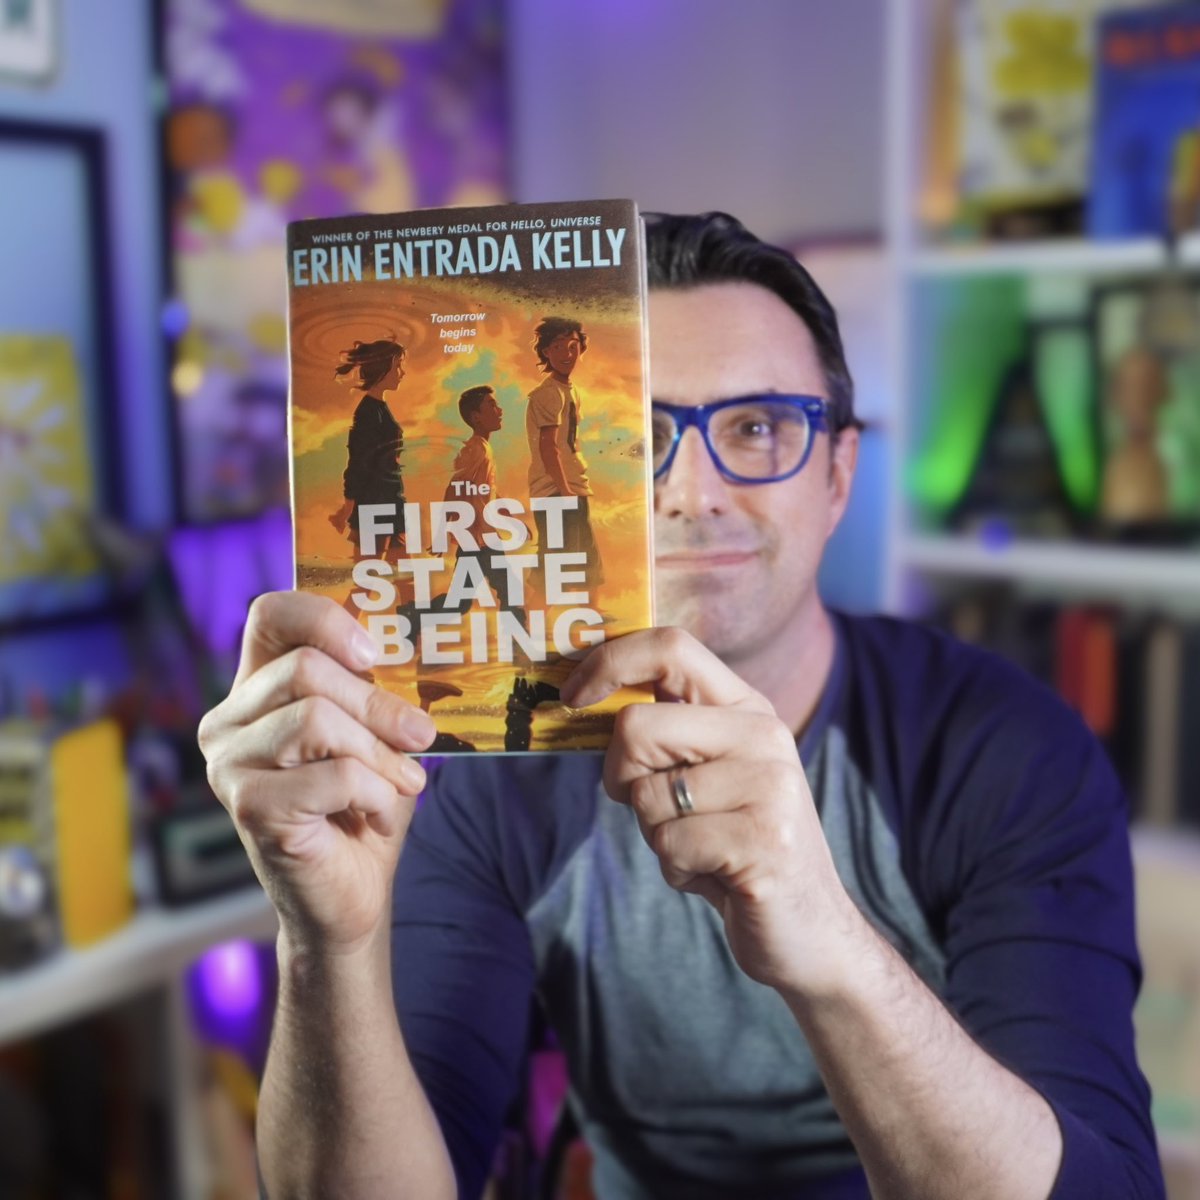 Some FUN FACTS: 📕Erin Entrada Kelly is cooler than all of us. 📕Erin Entrada Kelly’s new book just published. 📕The First State of Being is about time travel. (To 1999!) 📕Time travel, yet this book is grounded—first crushes, found family, and anxiety about the unknown future.